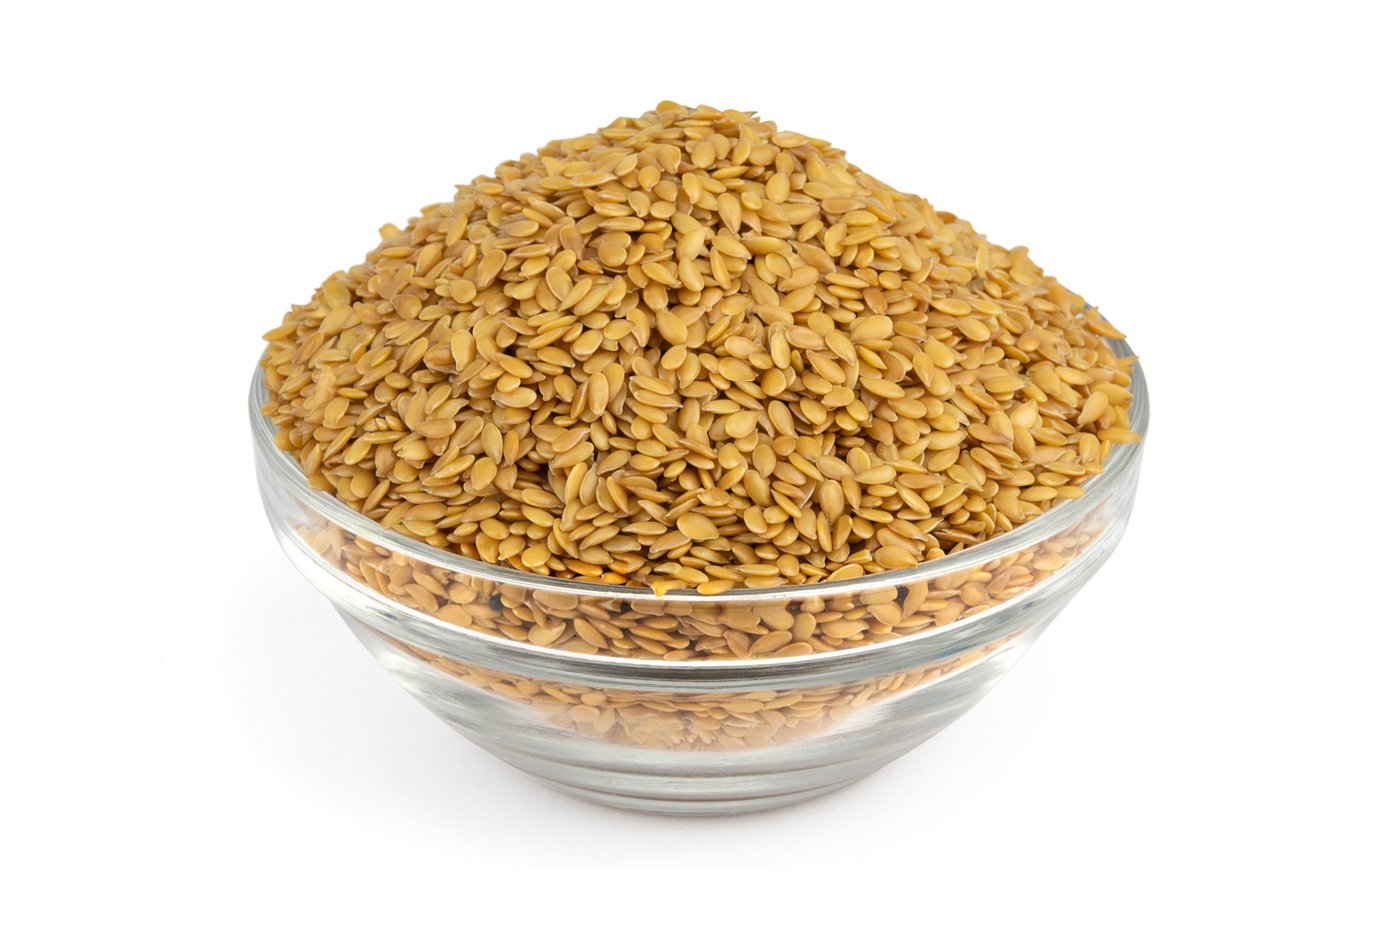 Golden Flax Seed image zoom